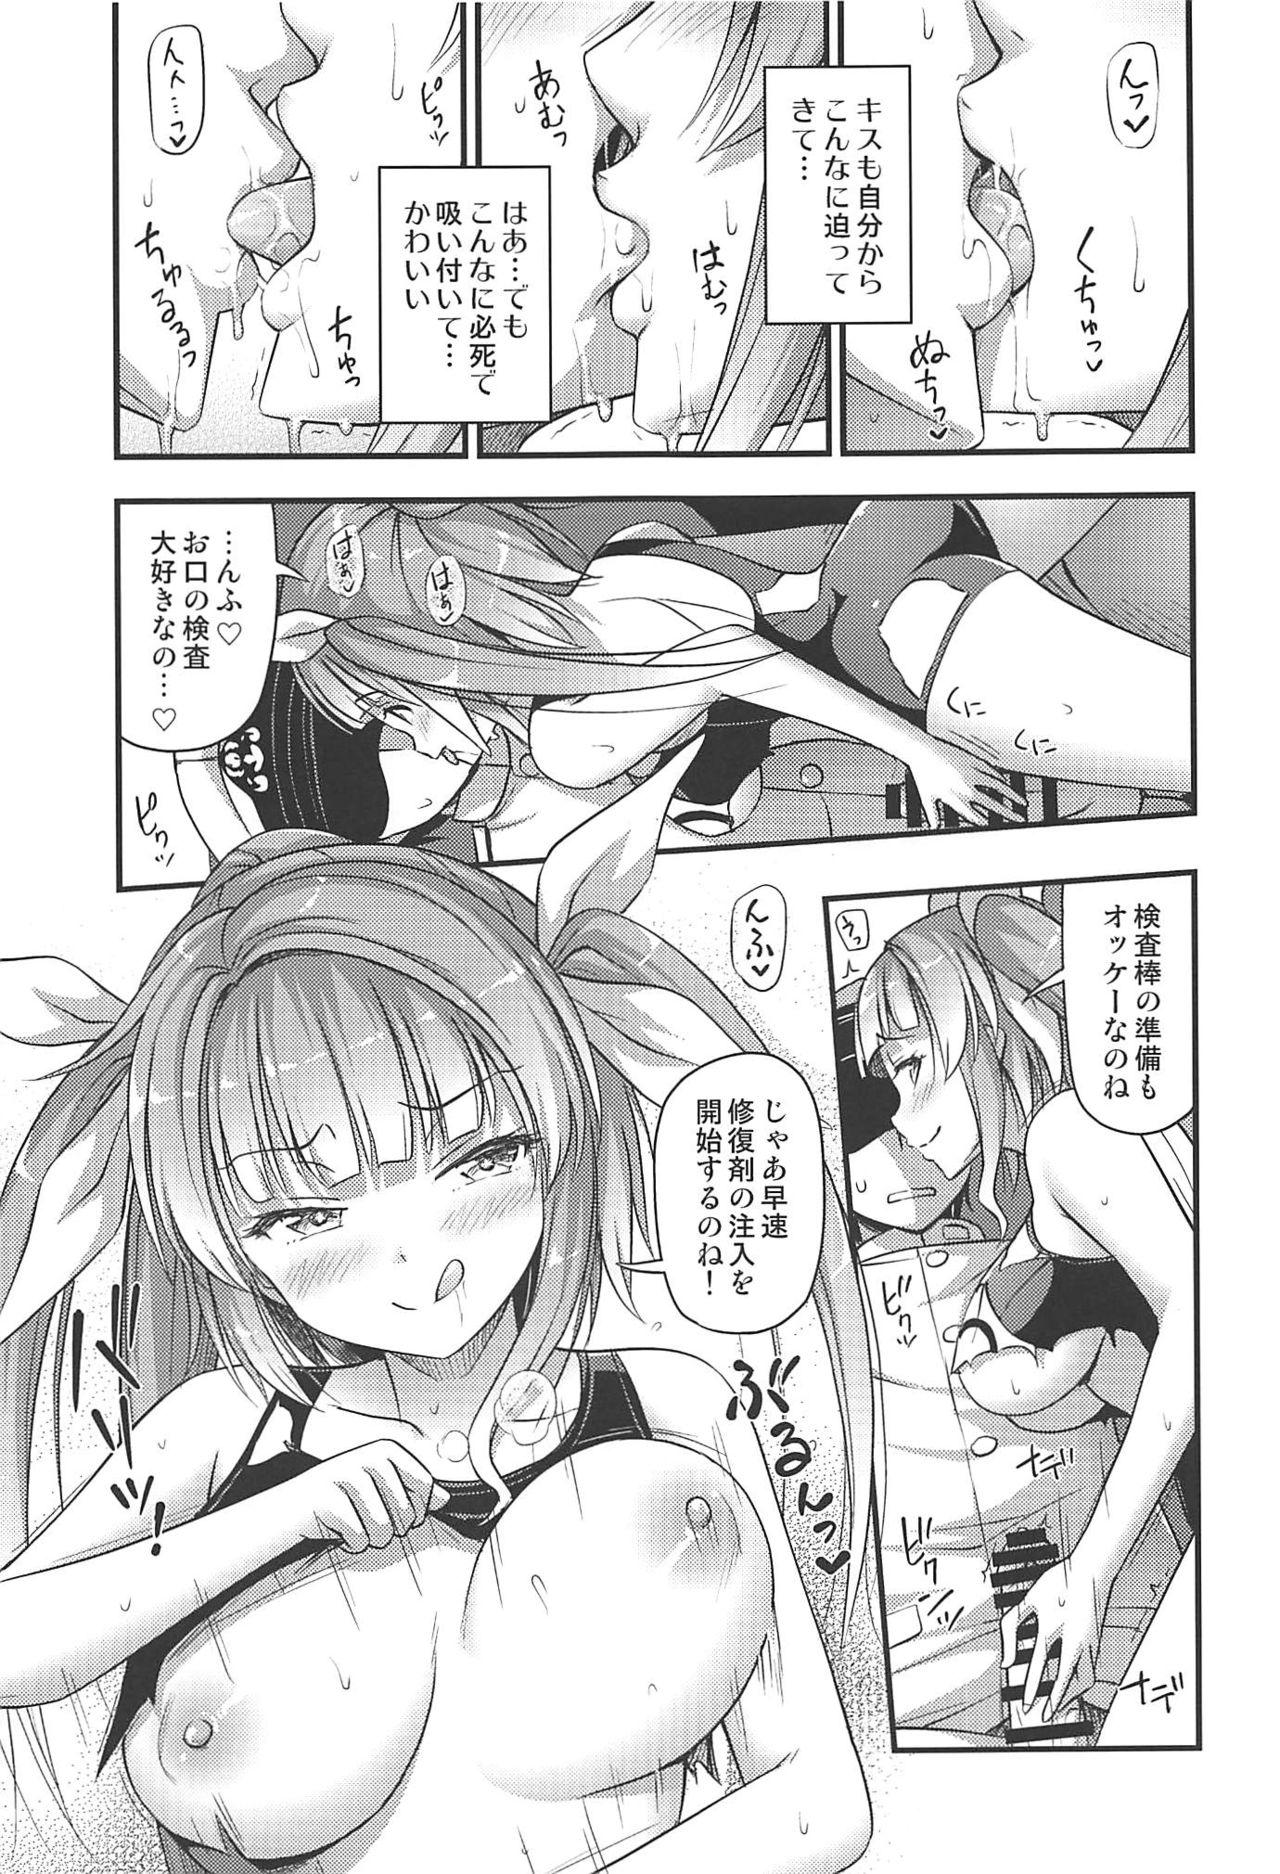 Pmv 1926 - Kantai collection Bed - Page 6